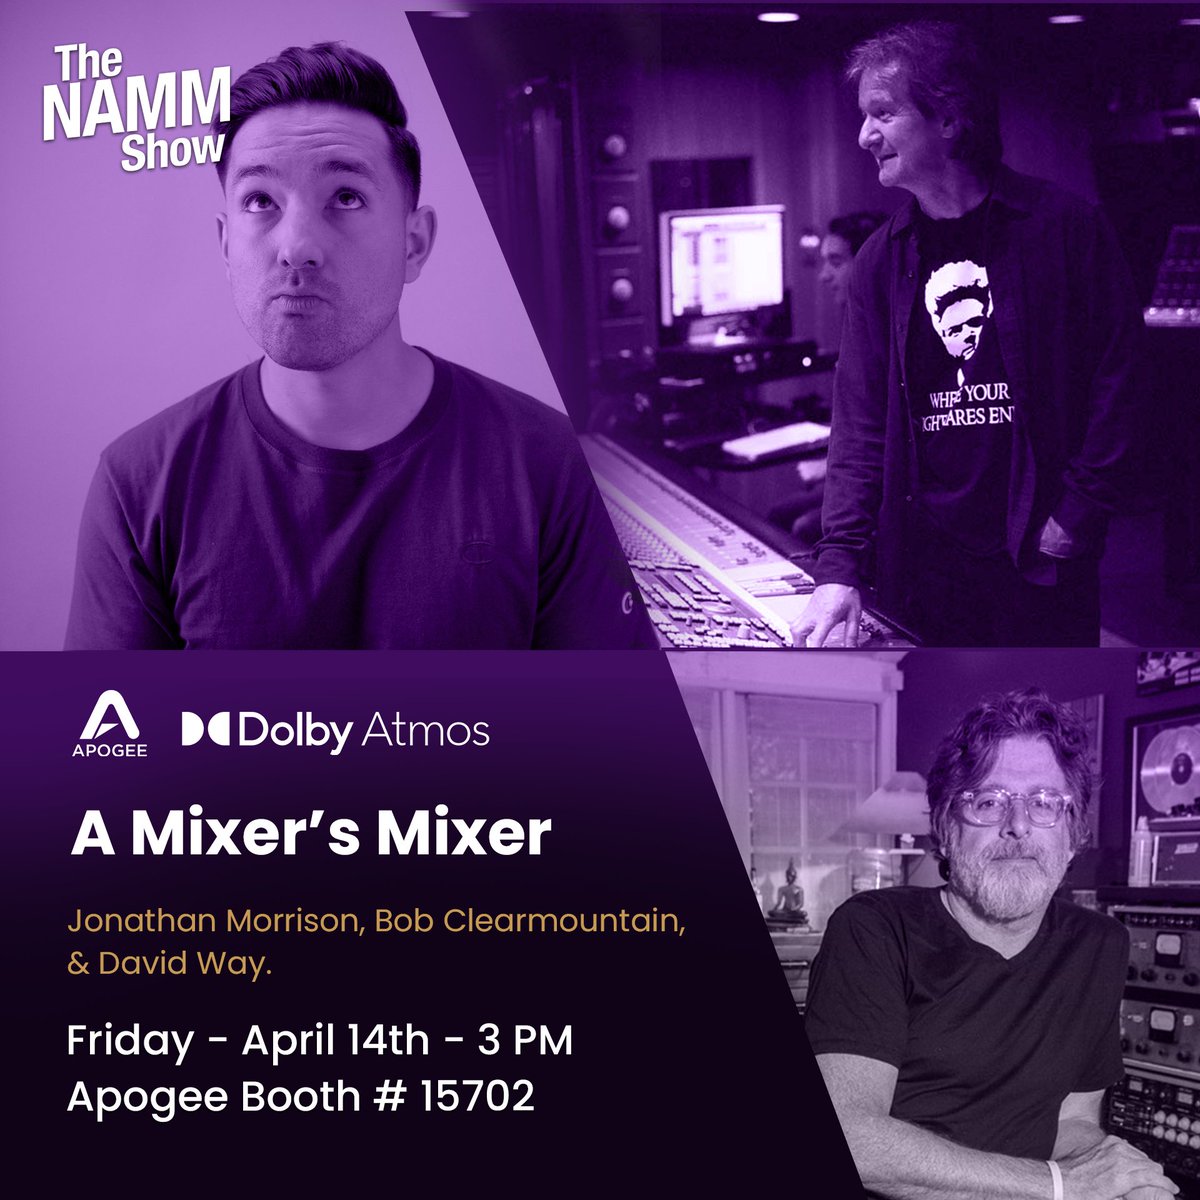 Join us tomorrow for a mixer you won’t soon forget! #NAMM2023